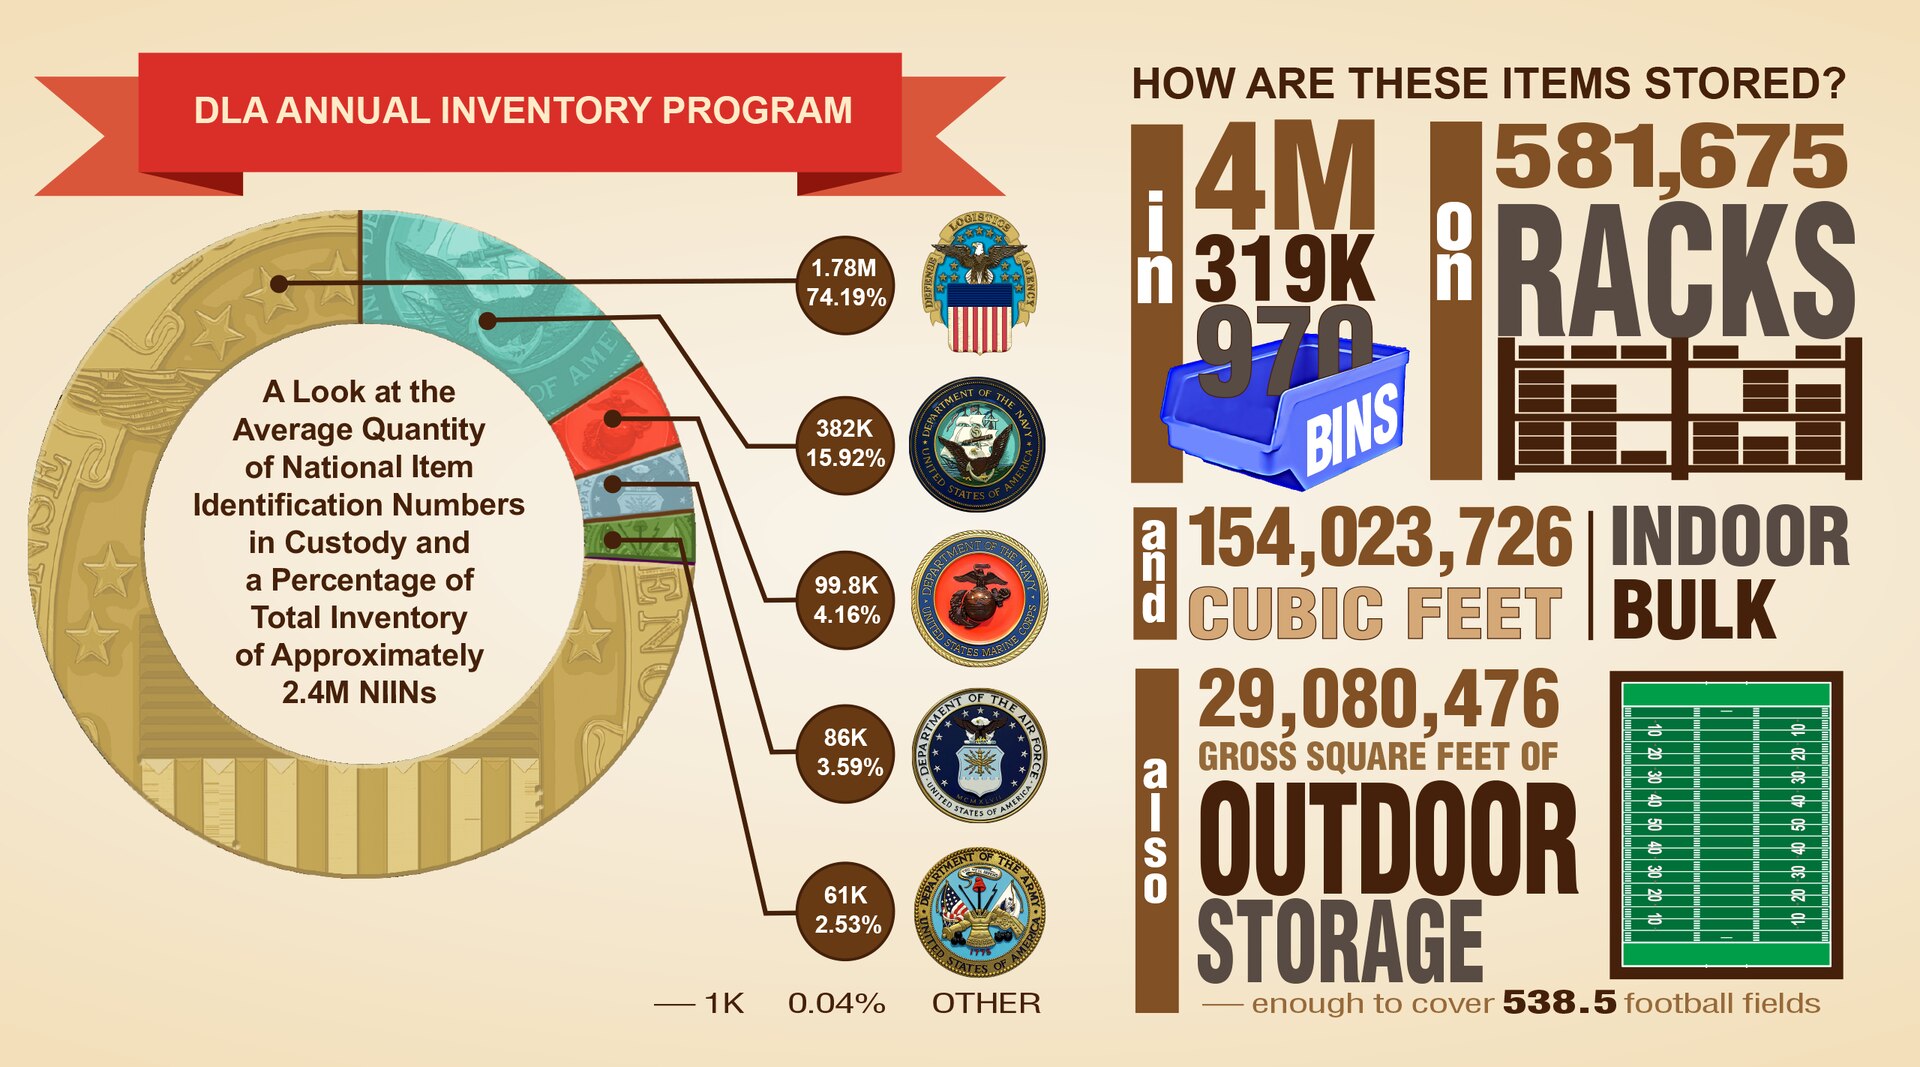 A Look at the Average Quantity of National Item Identification Numbers in Custody and a Percentage of Total Inventory of Approximately 2.4M NIINs.